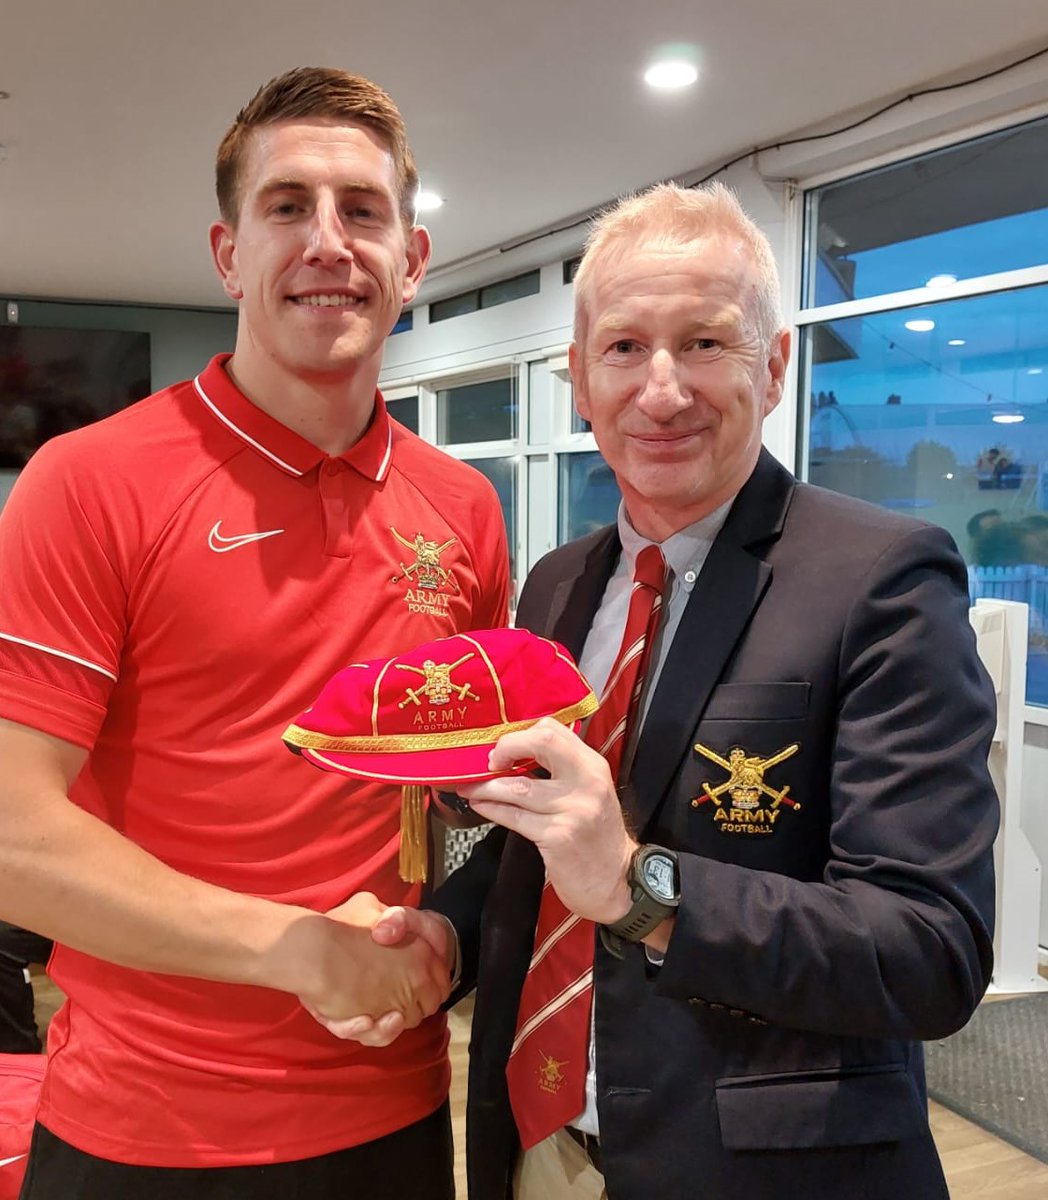 It is always an honour and privilege to award Army FA representative caps - well done LCpl Ross Brown. @101EngrRegt @Proud_Sappers @Armyfa1888 @ArmySgtMajor @ArmyFAReferees @ARWomenFootball @ArmySportASCB @ArmyInWales @DCrook70 @RFCAforWales @CCResRE @CorpsColRE